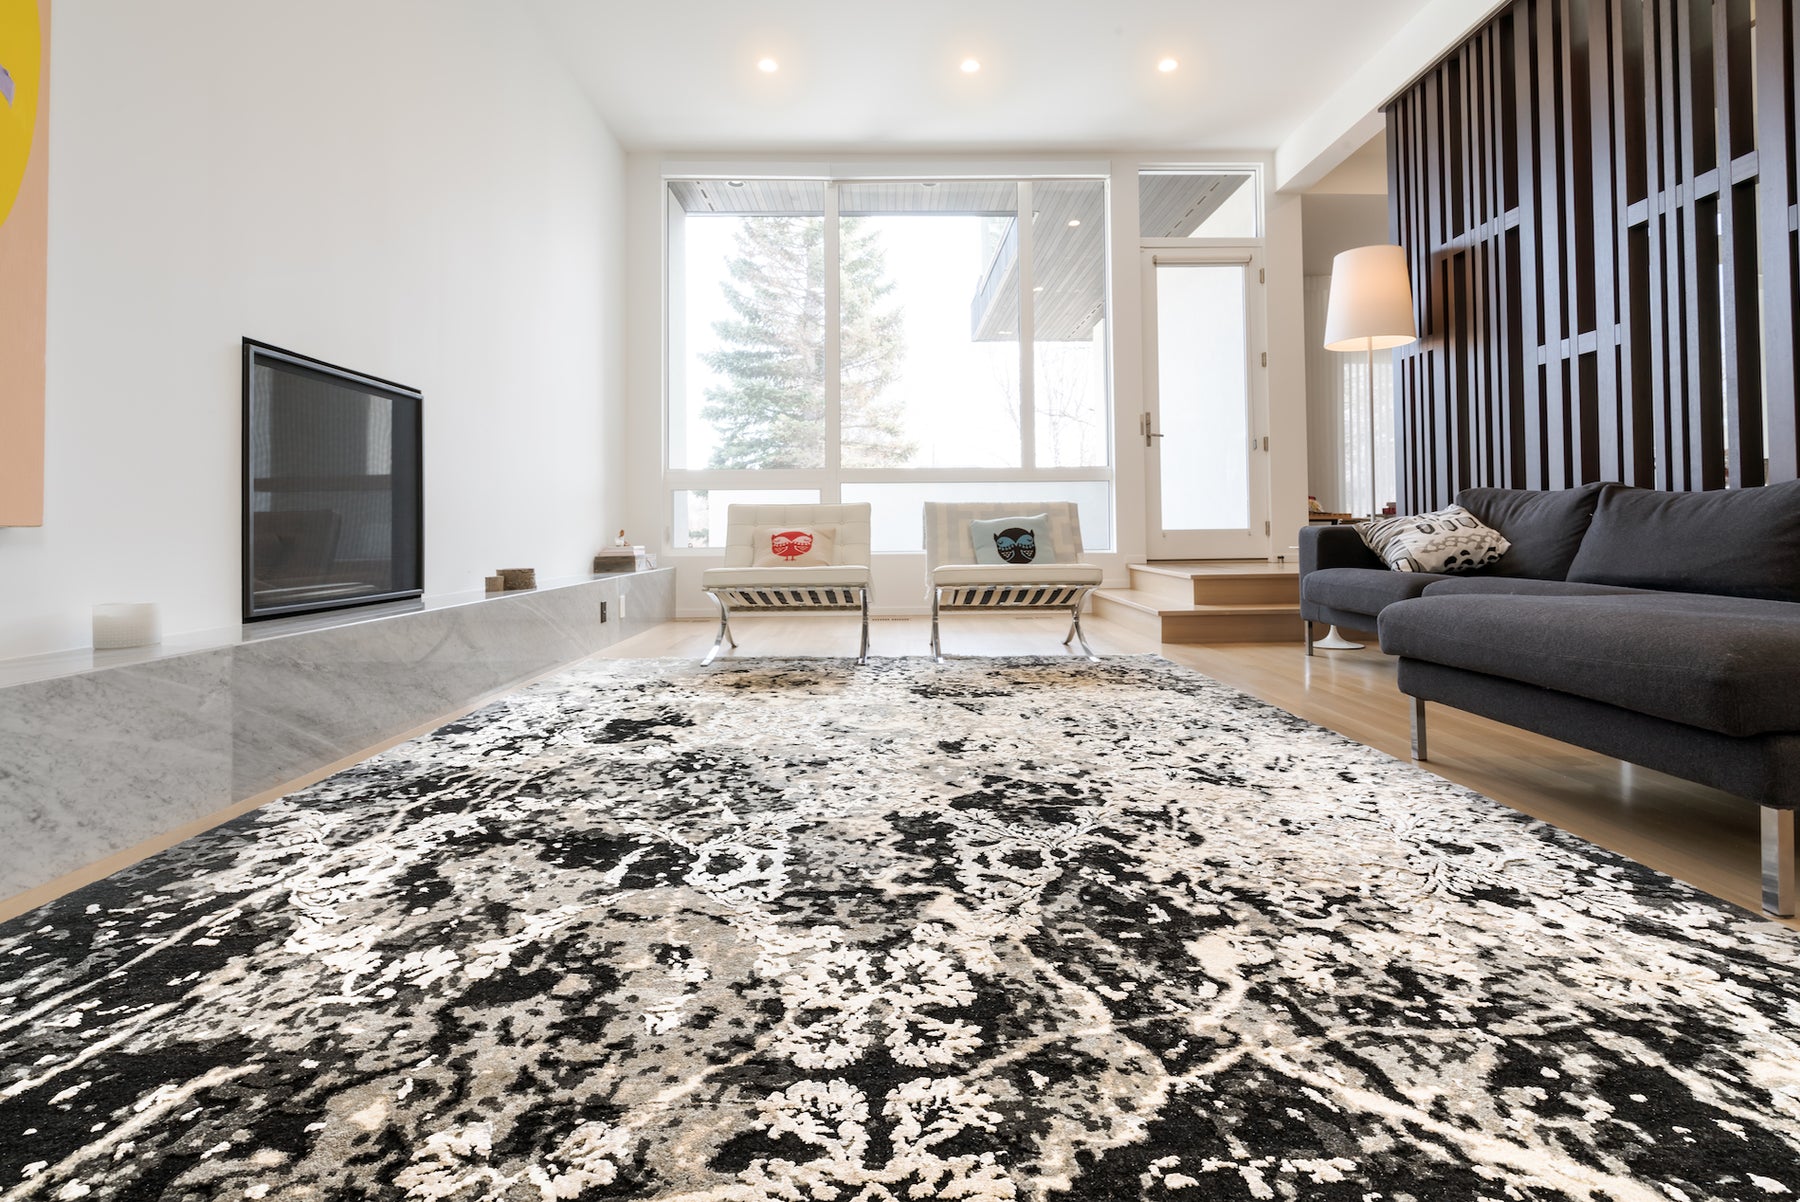 From Classic to Contemporary in this Calgary Living Room